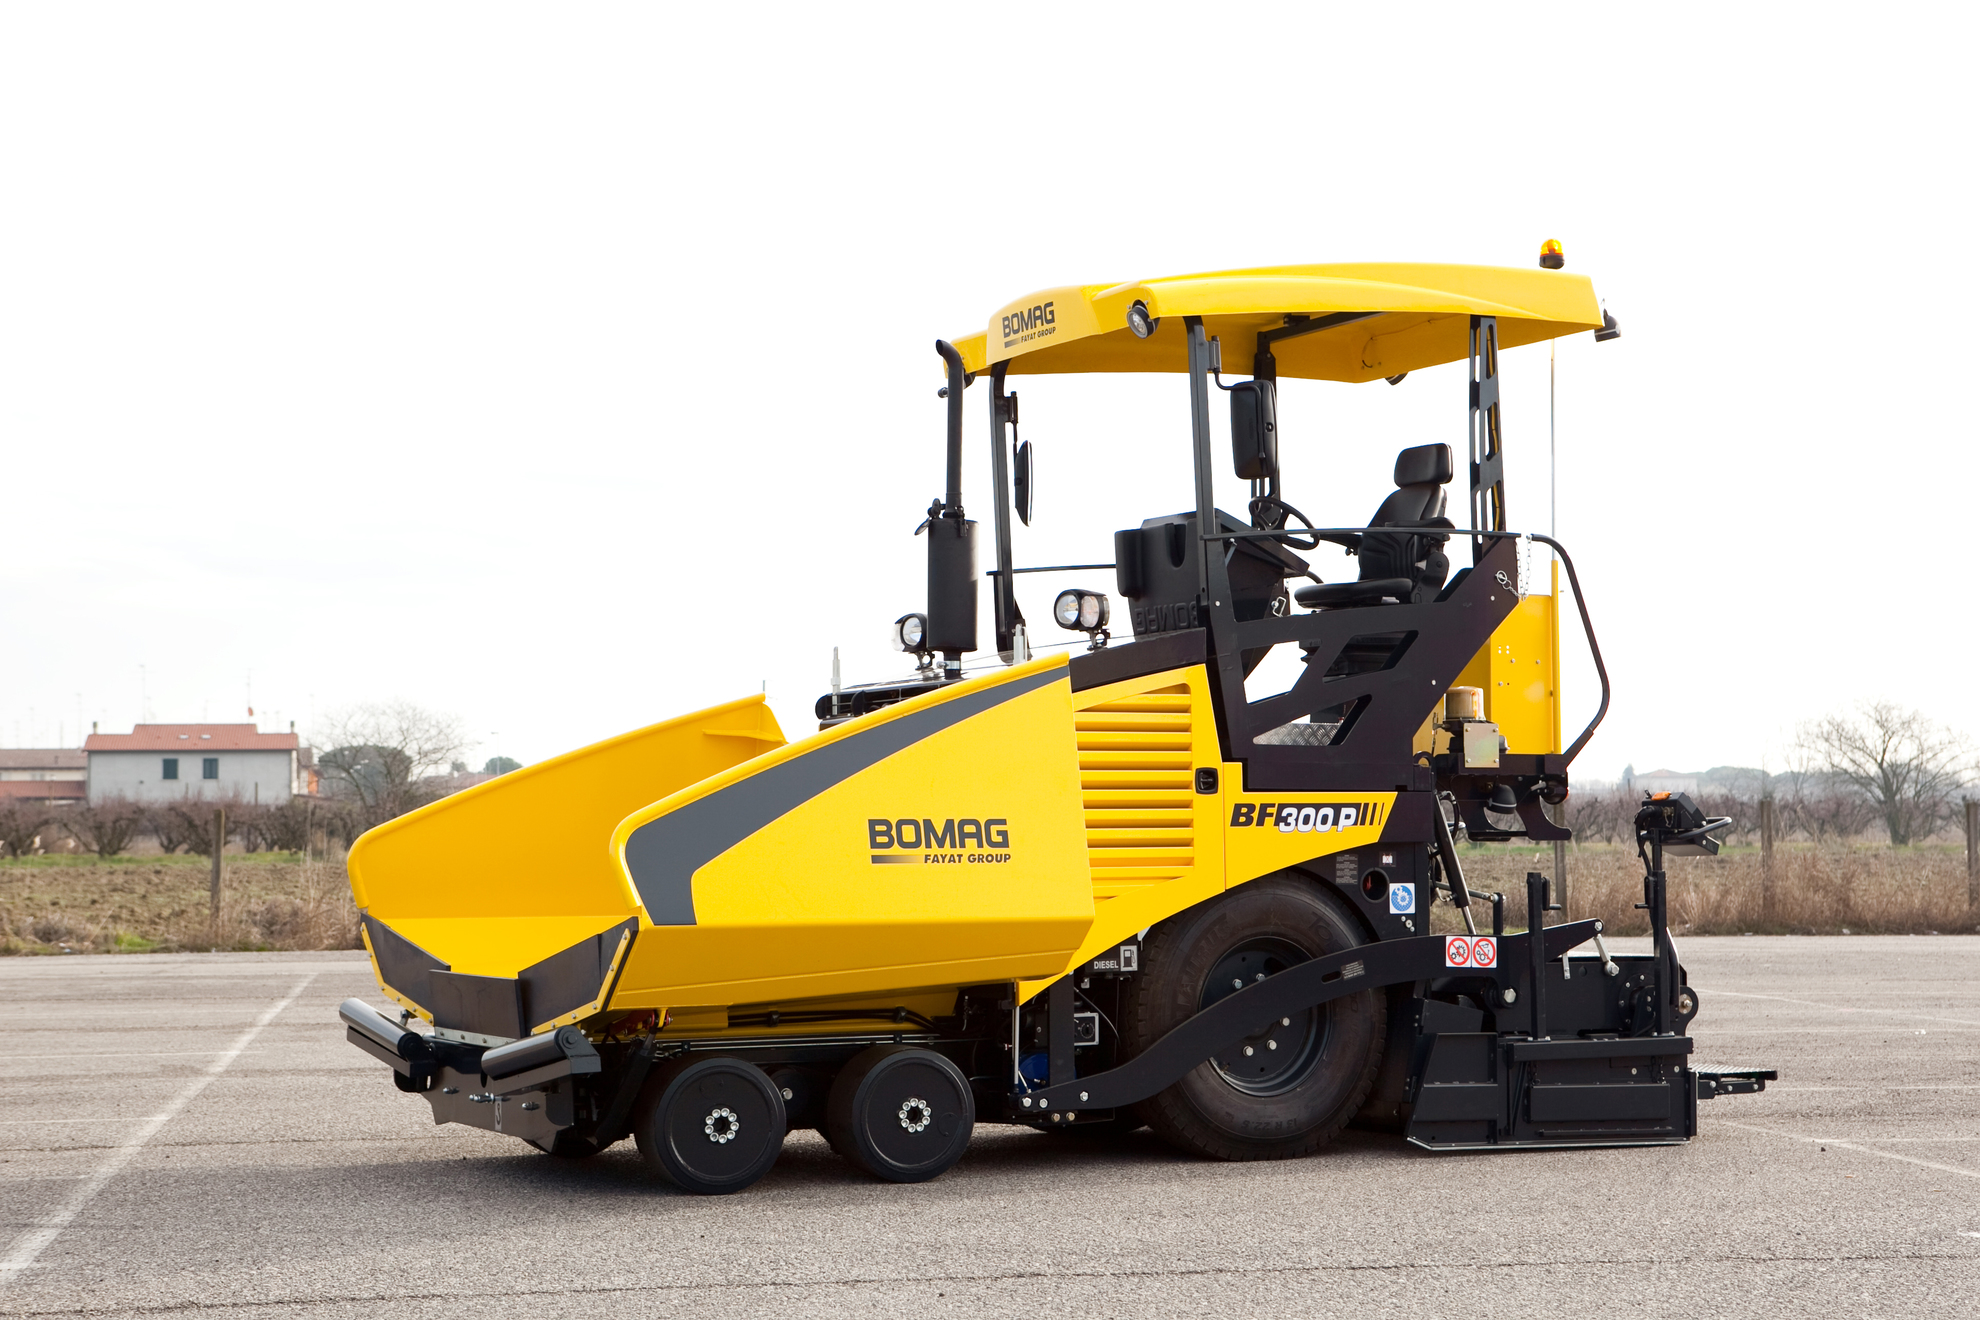 BOMAG BF 300 P